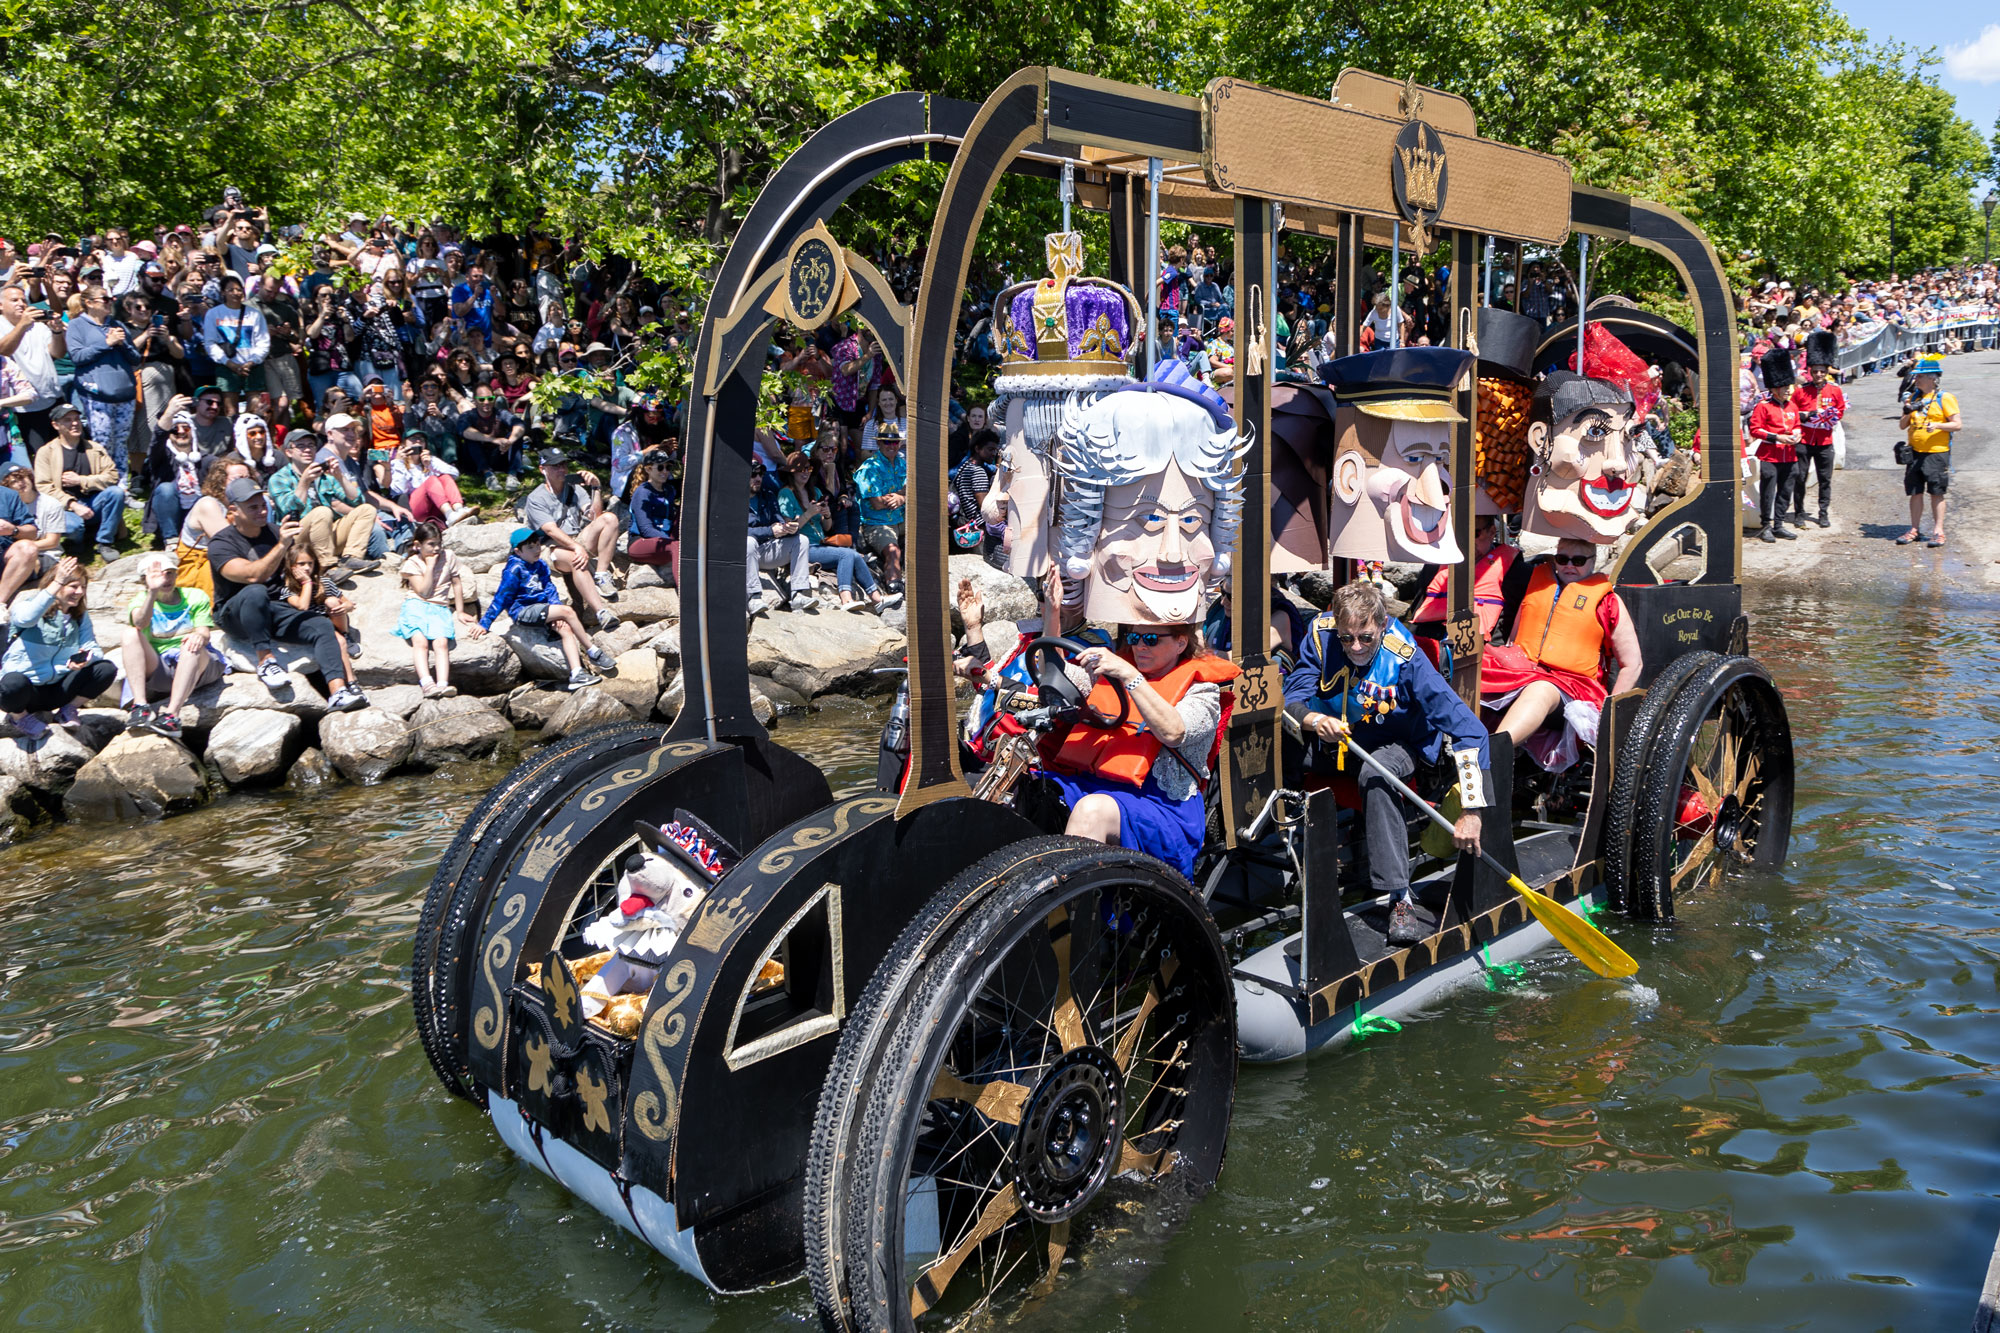 WCG Goes to the Kinetic Sculpture Race!